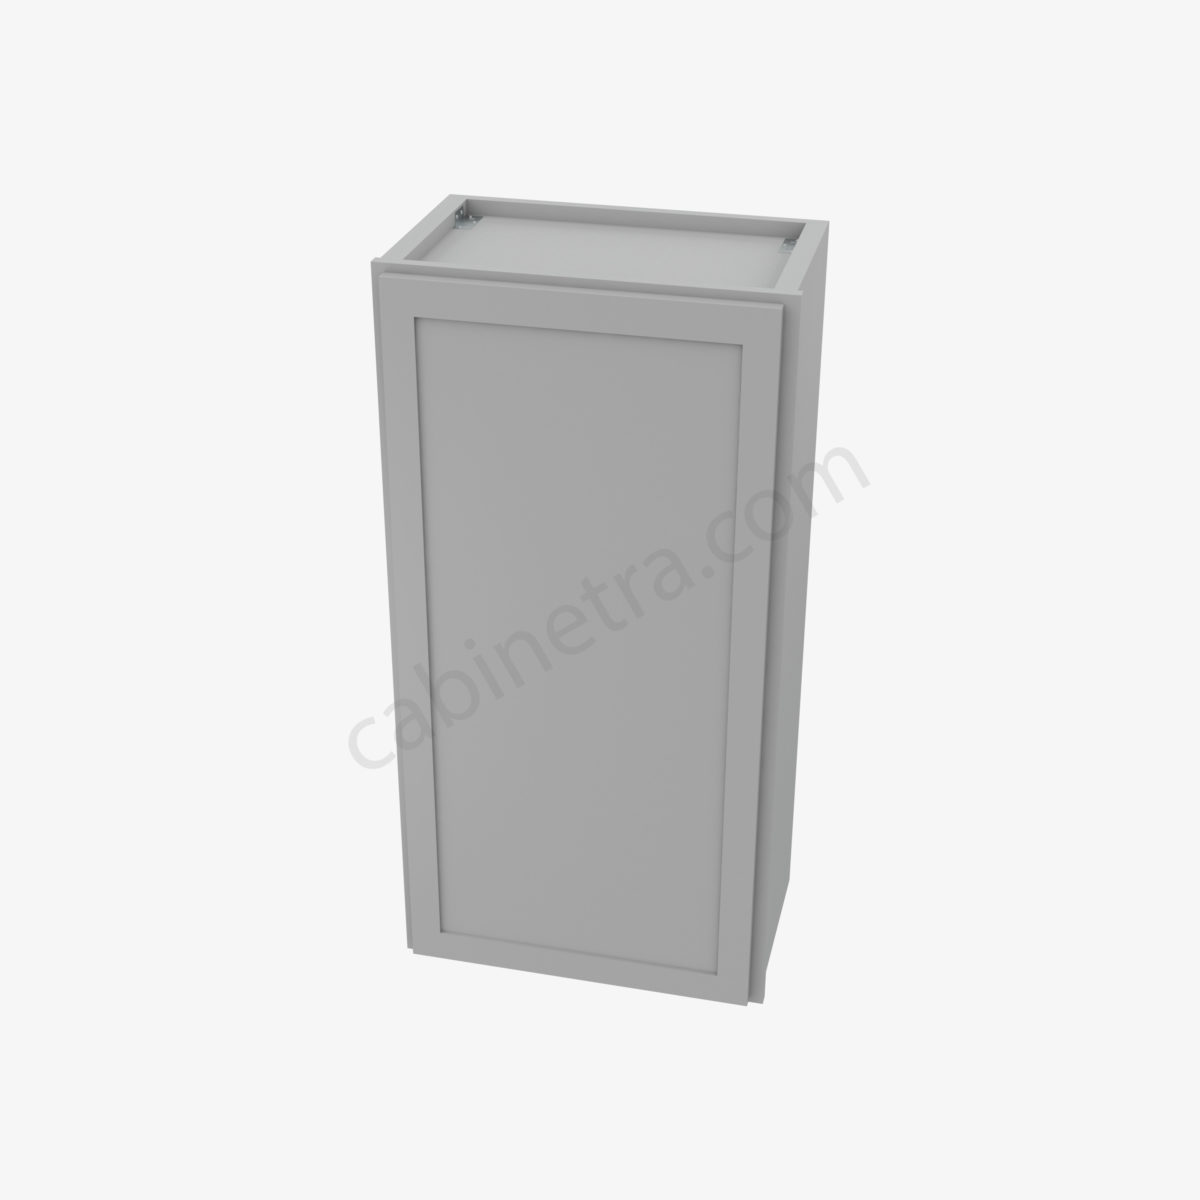 AB W2142 3 Forevermark Lait Gray Shaker Cabinetra scaled